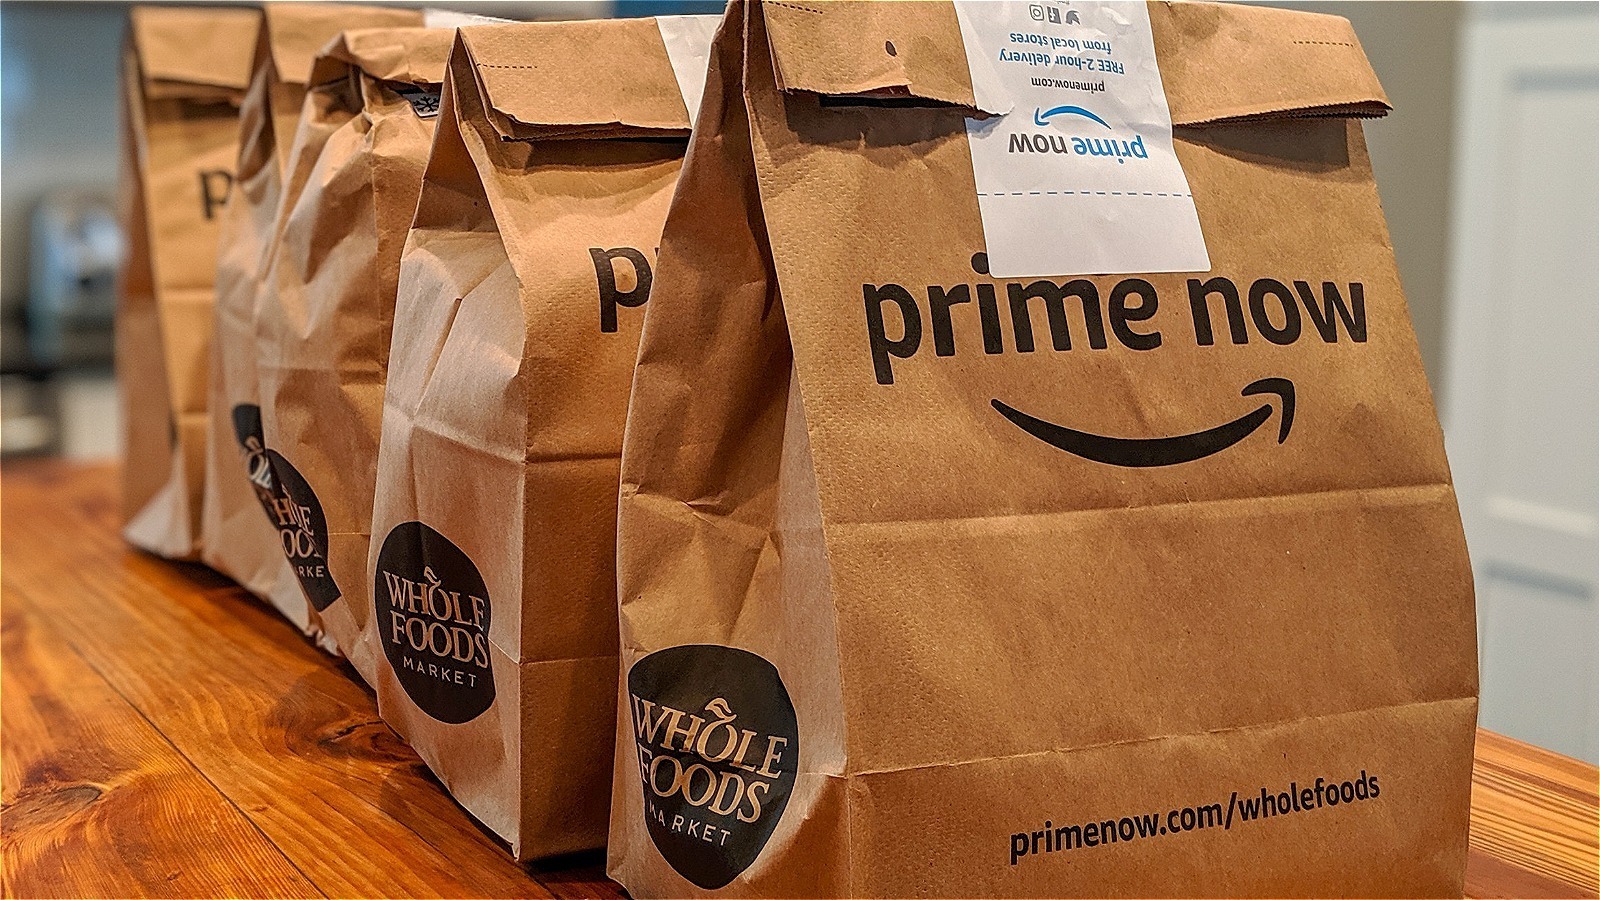 https://www.mashed.com/img/gallery/amazon-is-reportedly-transferring-its-shoppers-to-whole-foods-and-reddit-is-confused/l-intro-1646157332.jpg